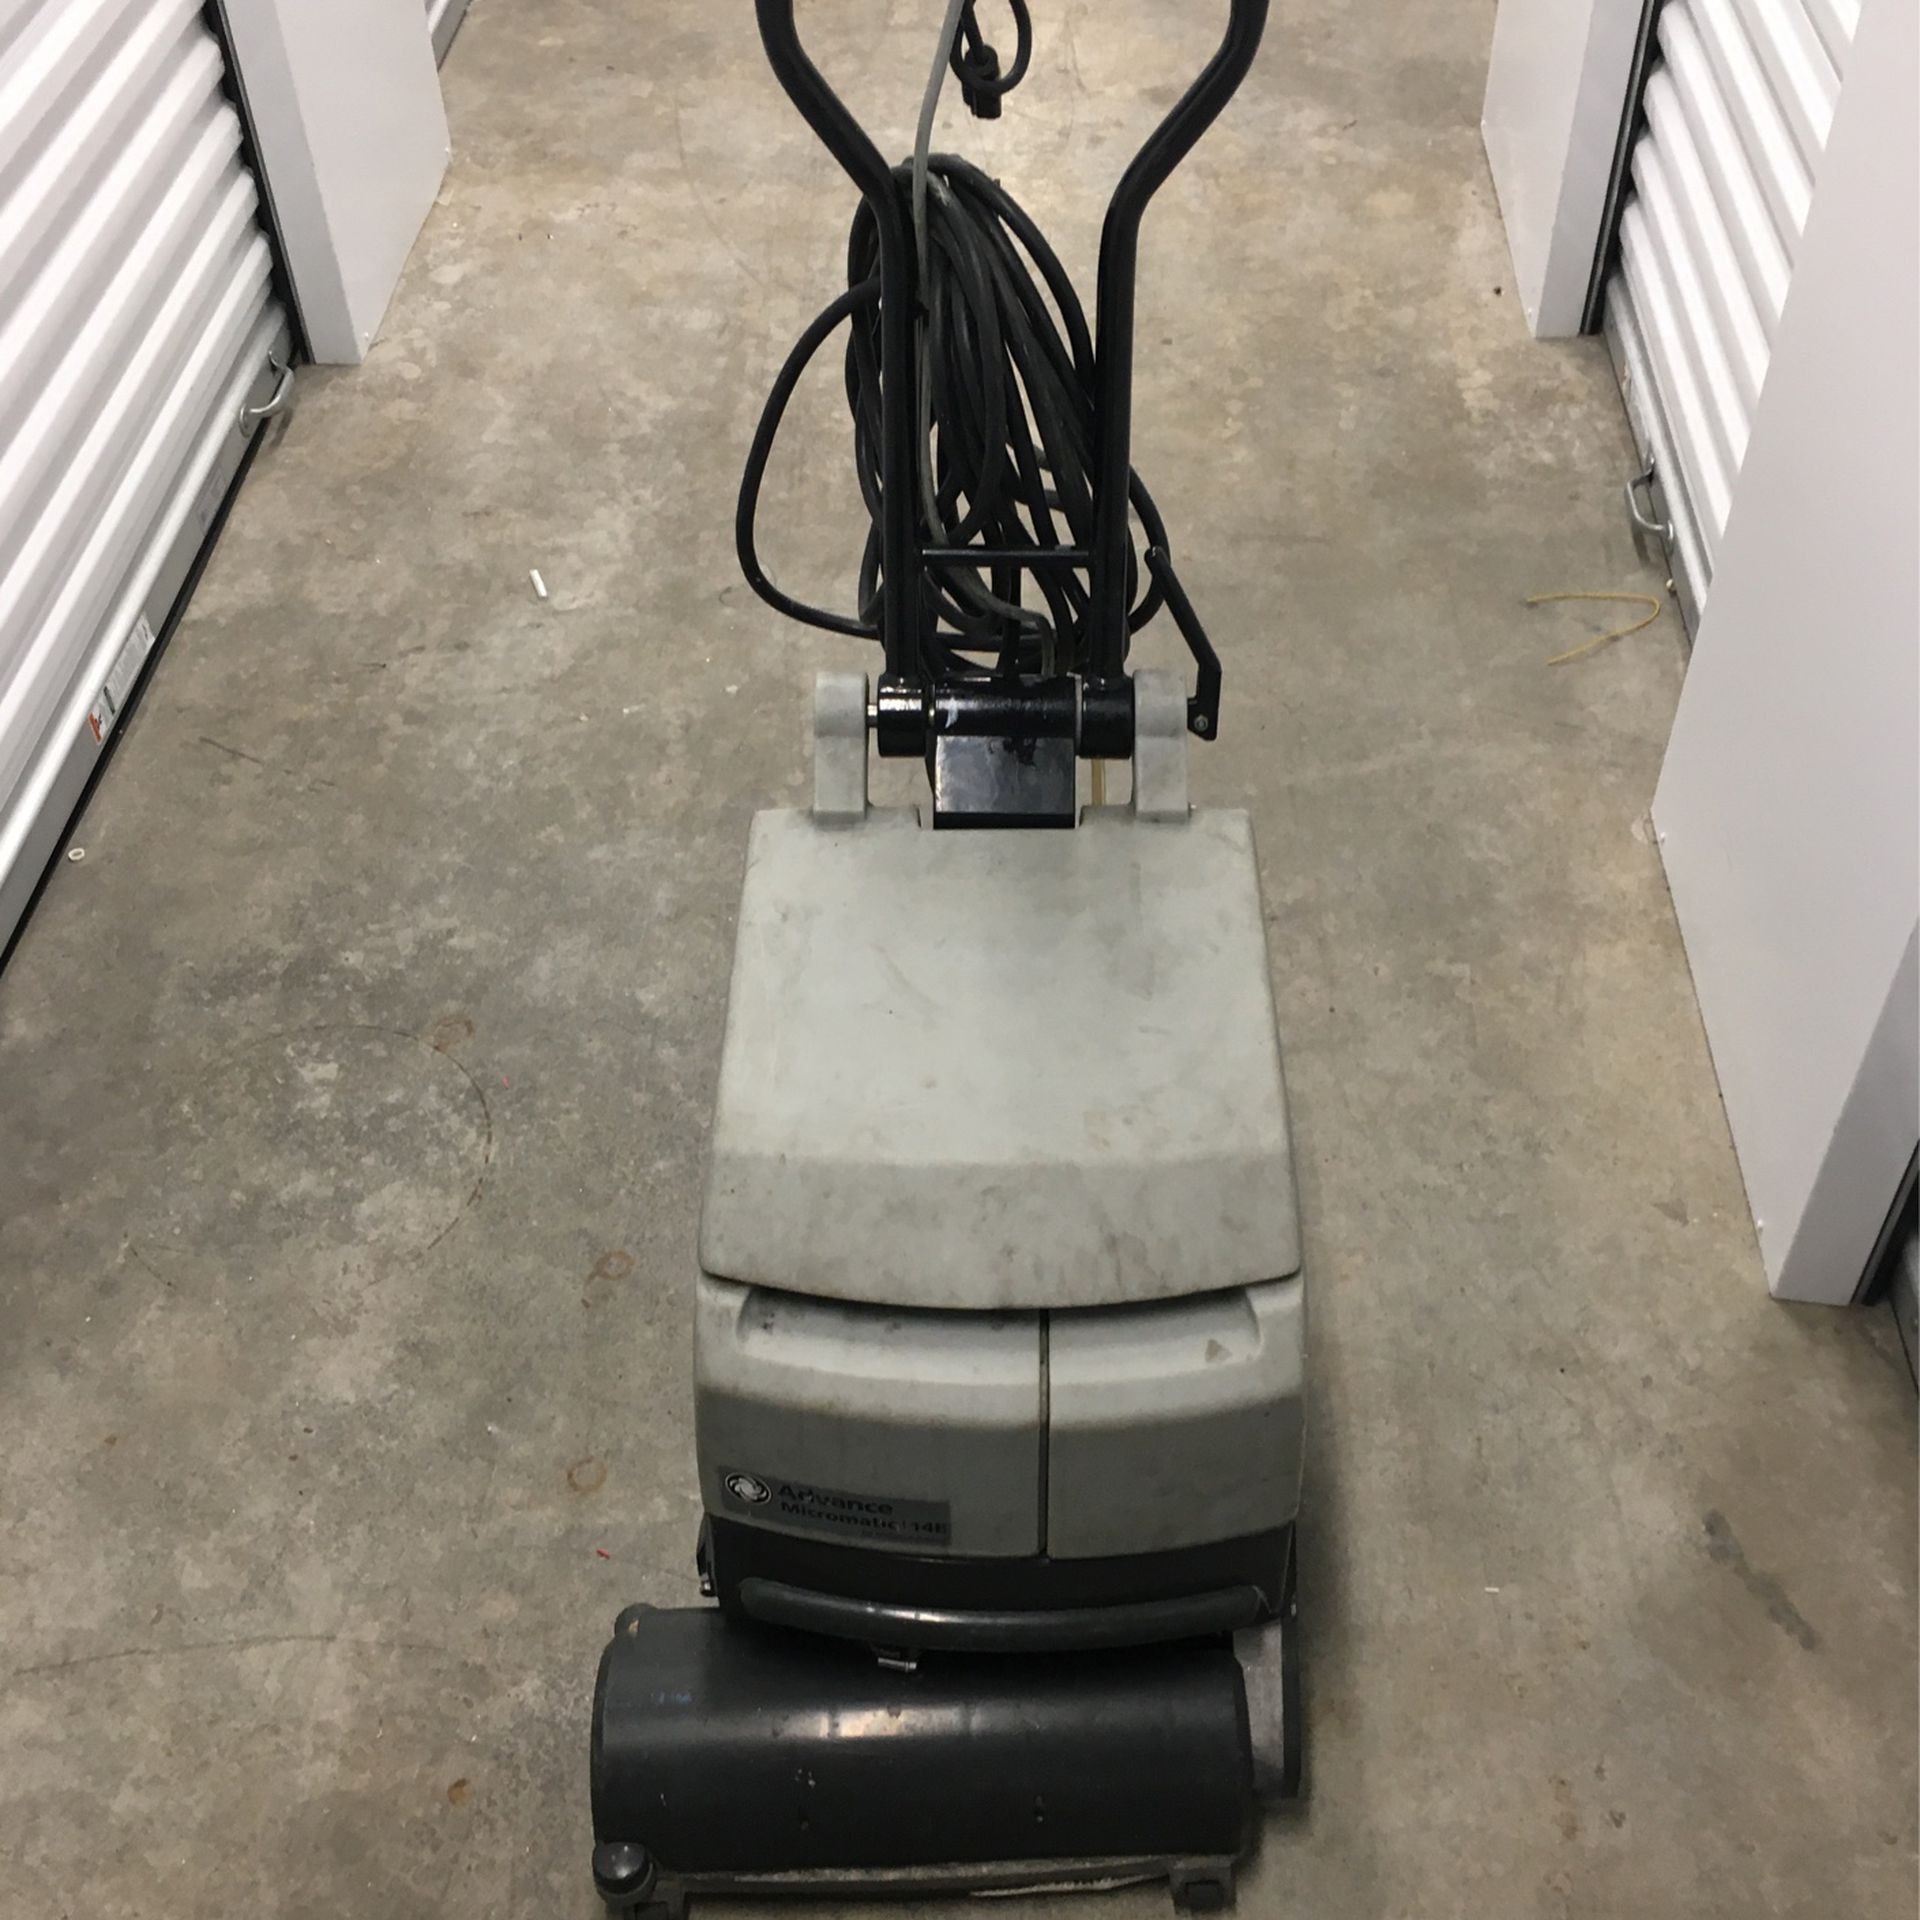 CLARKE FLOOR MAINTAINER SCRUBBER MICRO MATIC 14E HARD SURFACE CLEANER